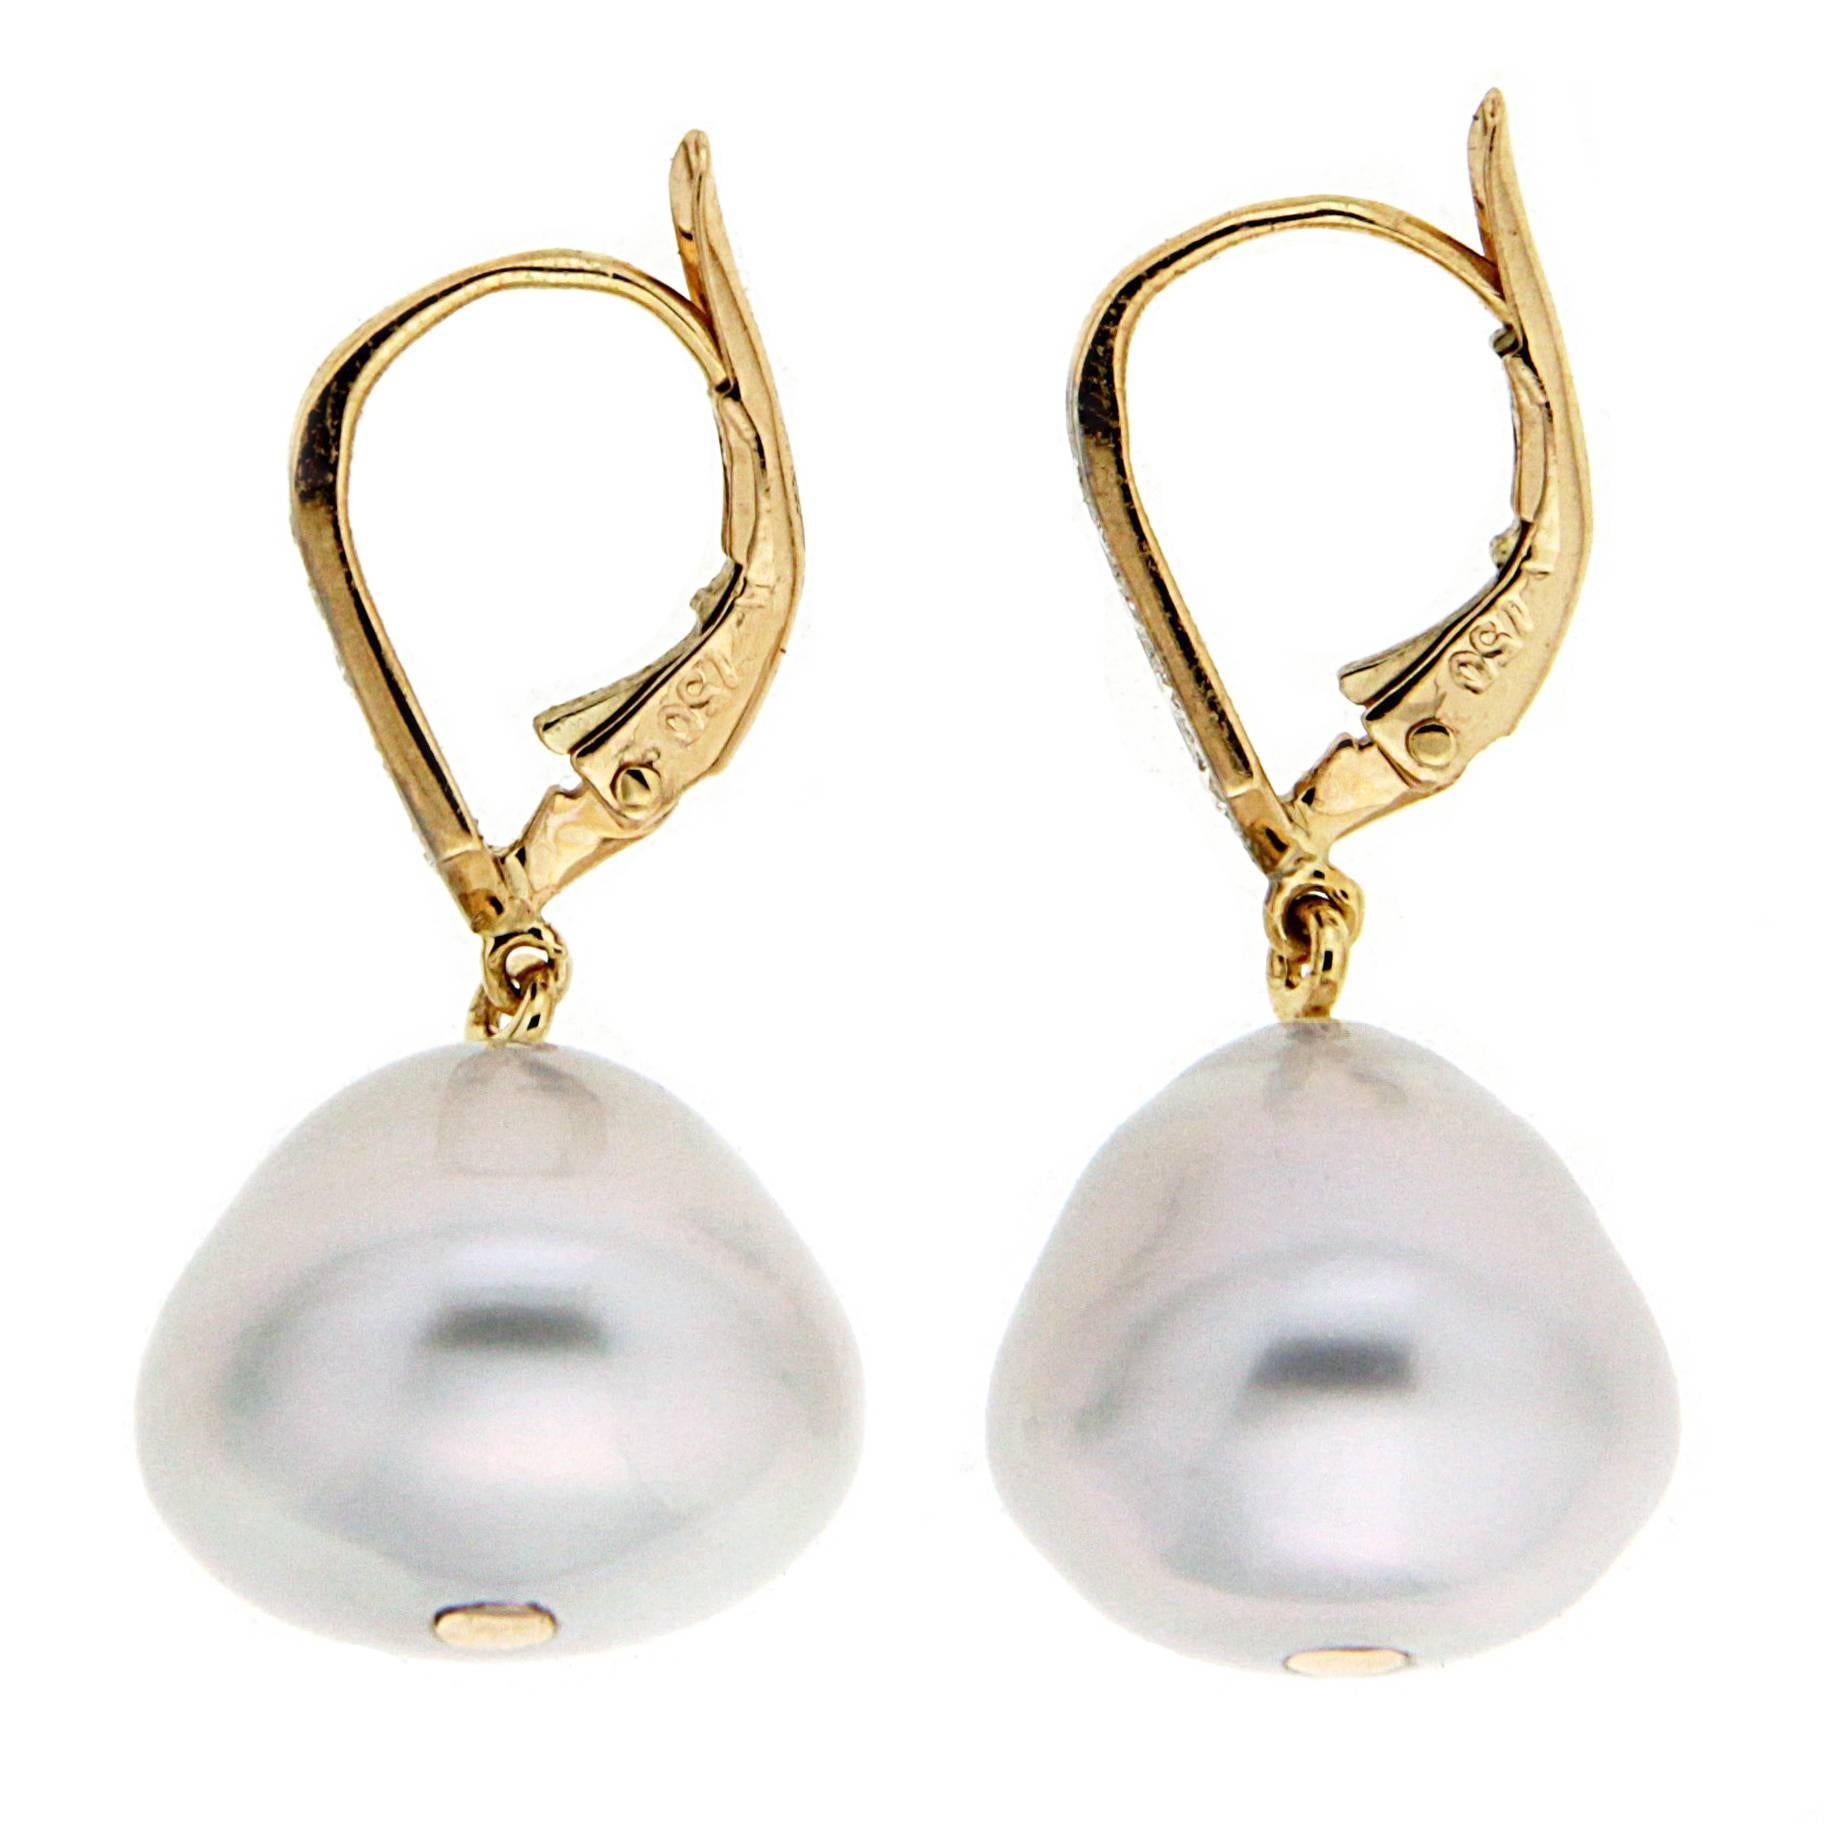 Baroque white South Sea pearls drop earrings with diamonds and lever back in 18kt yellow gold.